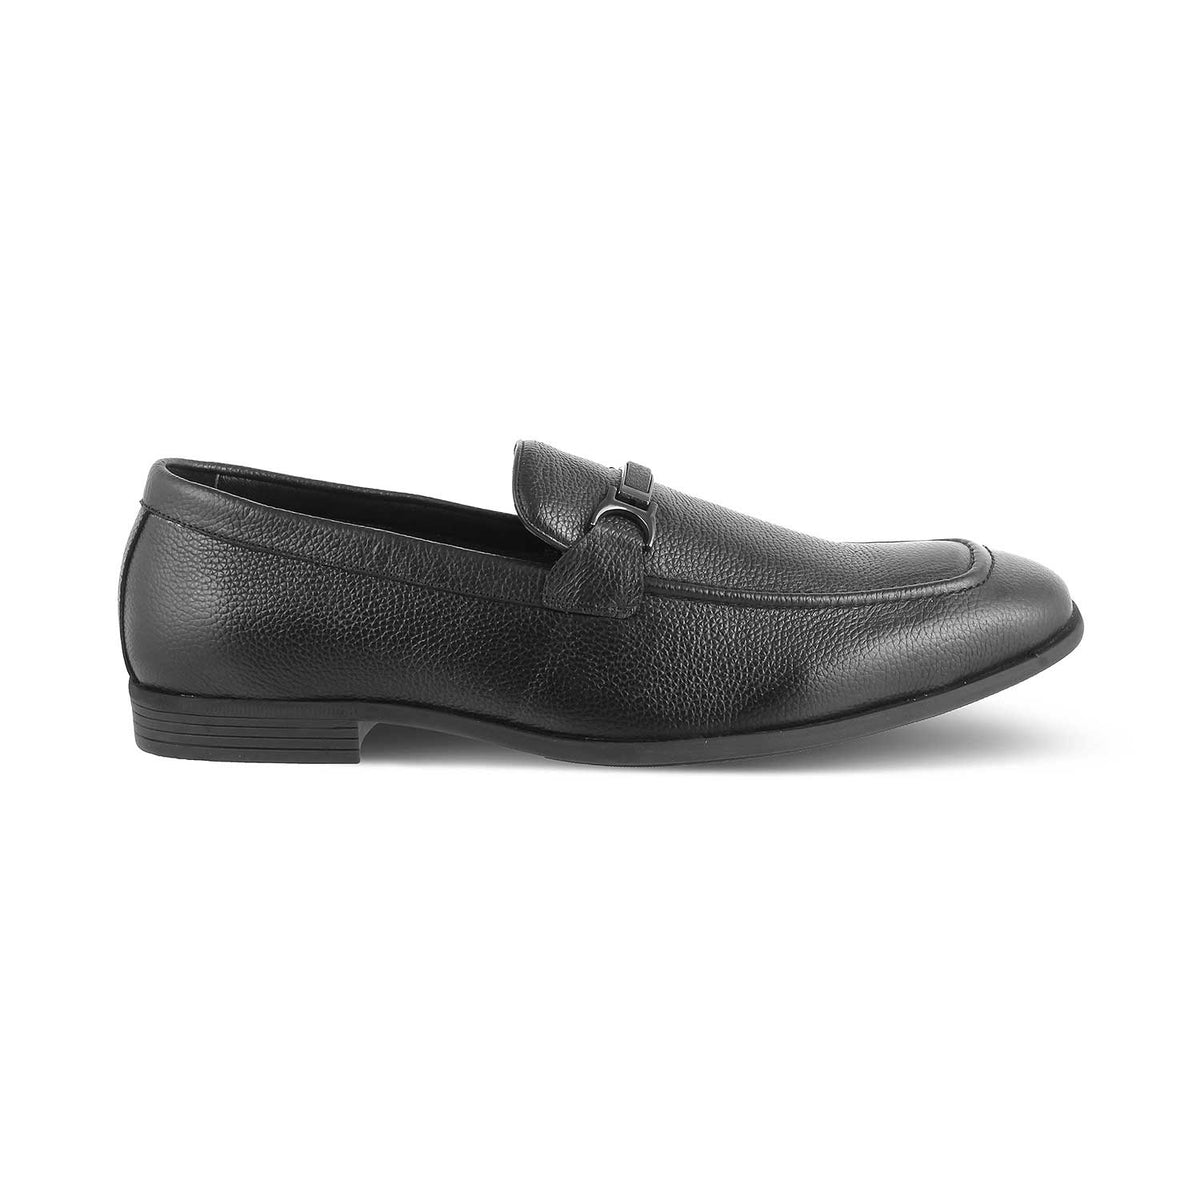 The Leven Black Men's Leather Loafers Tresmode